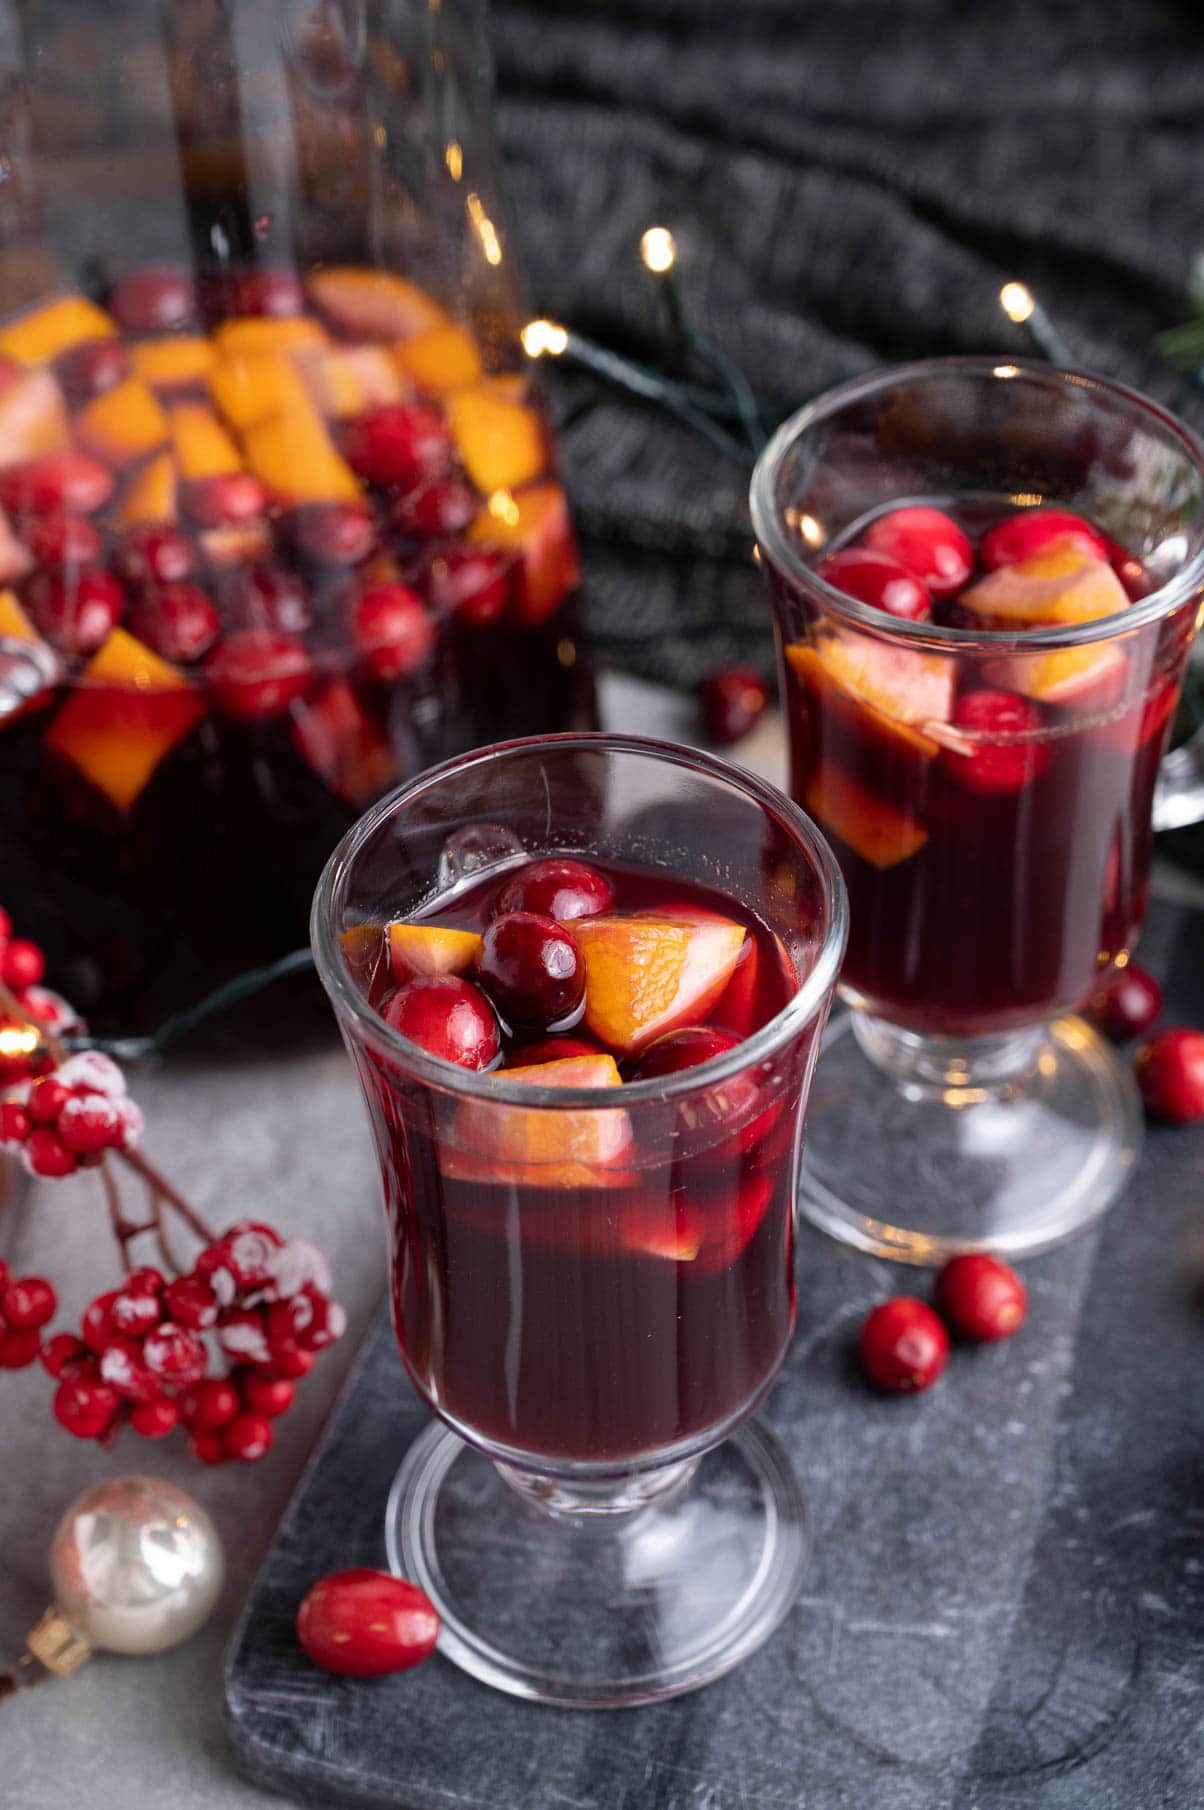 Two glasses with Christmas sangria in a black board. A pitcher and Christmas decorations in the background.